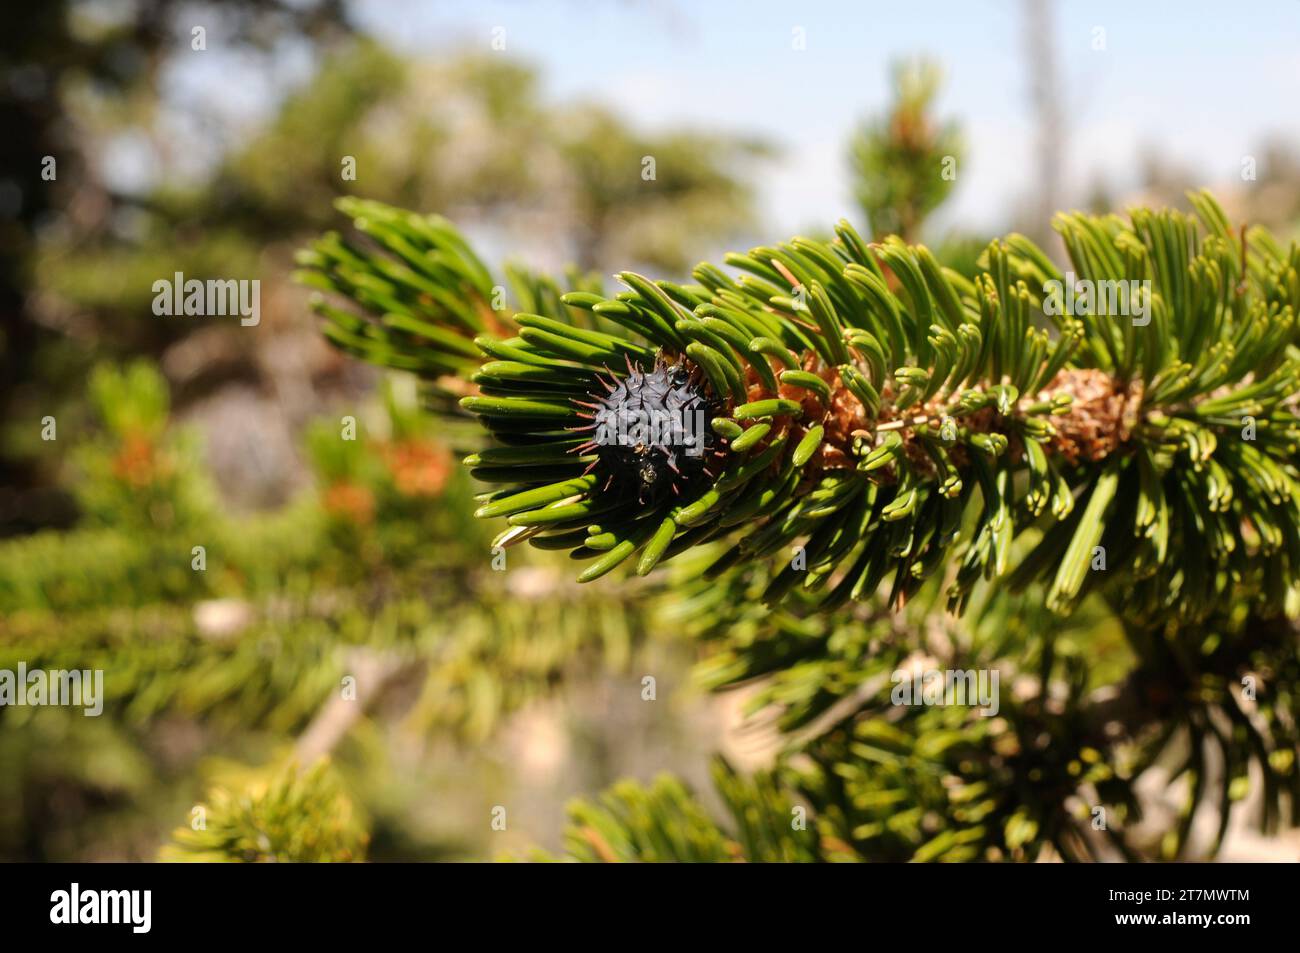 Great Basin bristlecone pine (Pinus longaeva) is an evergreen tree which is caracterized by its great longevity. Female cone and leaves detail. Is nat Stock Photo